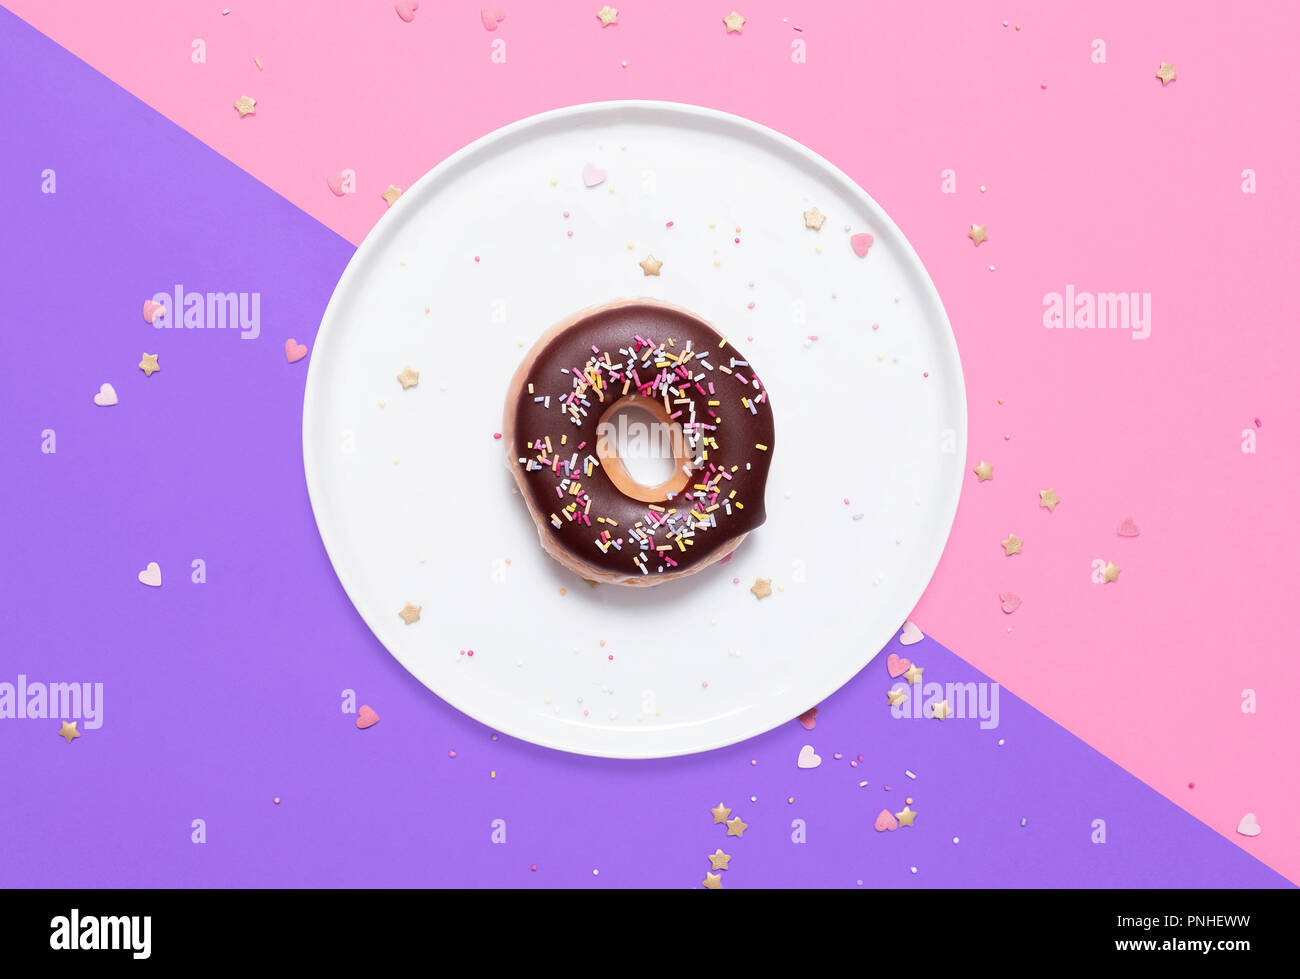 Classic donut with chocolate glaze frosting and sprinkles on a white plate on a split pink and purple pastel background with hearts scattered Stock Photo